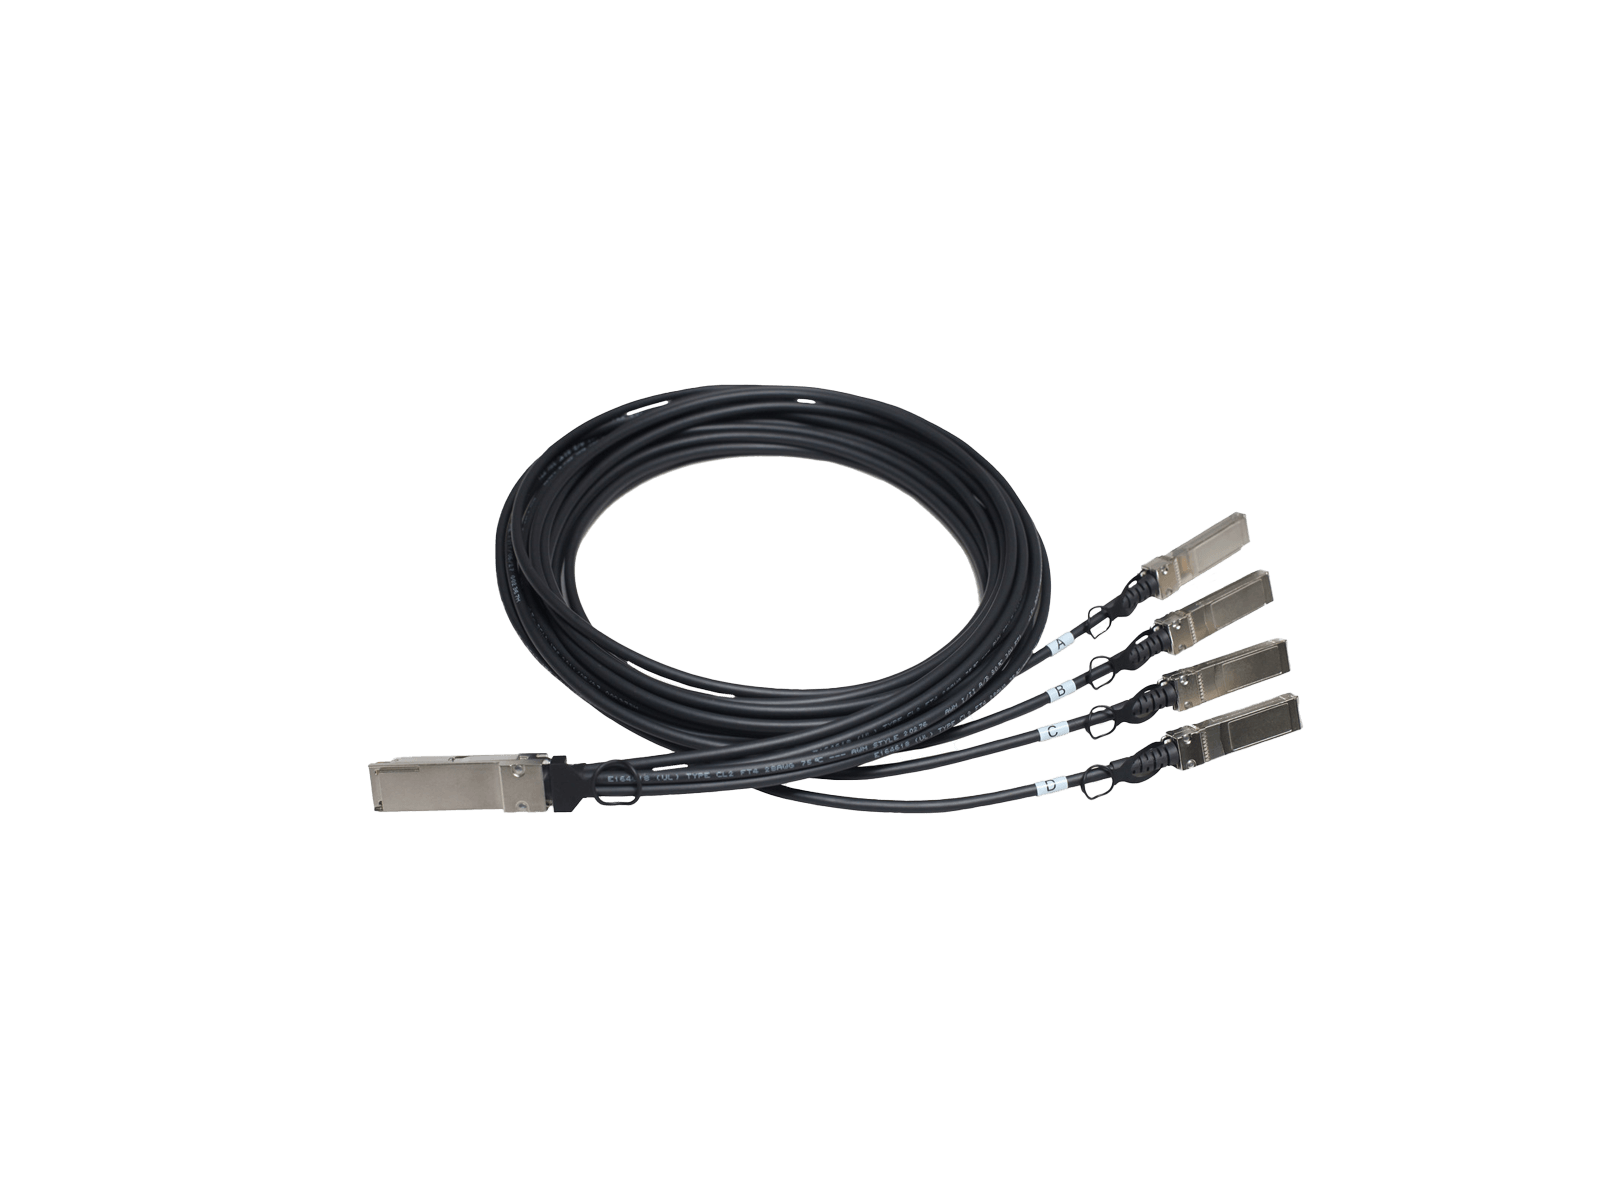 HP JG331A HPE FlexNetwork X240 40G QSFP+ to 4x 10G SFP+ 5M Splitter Cable 4X10G.